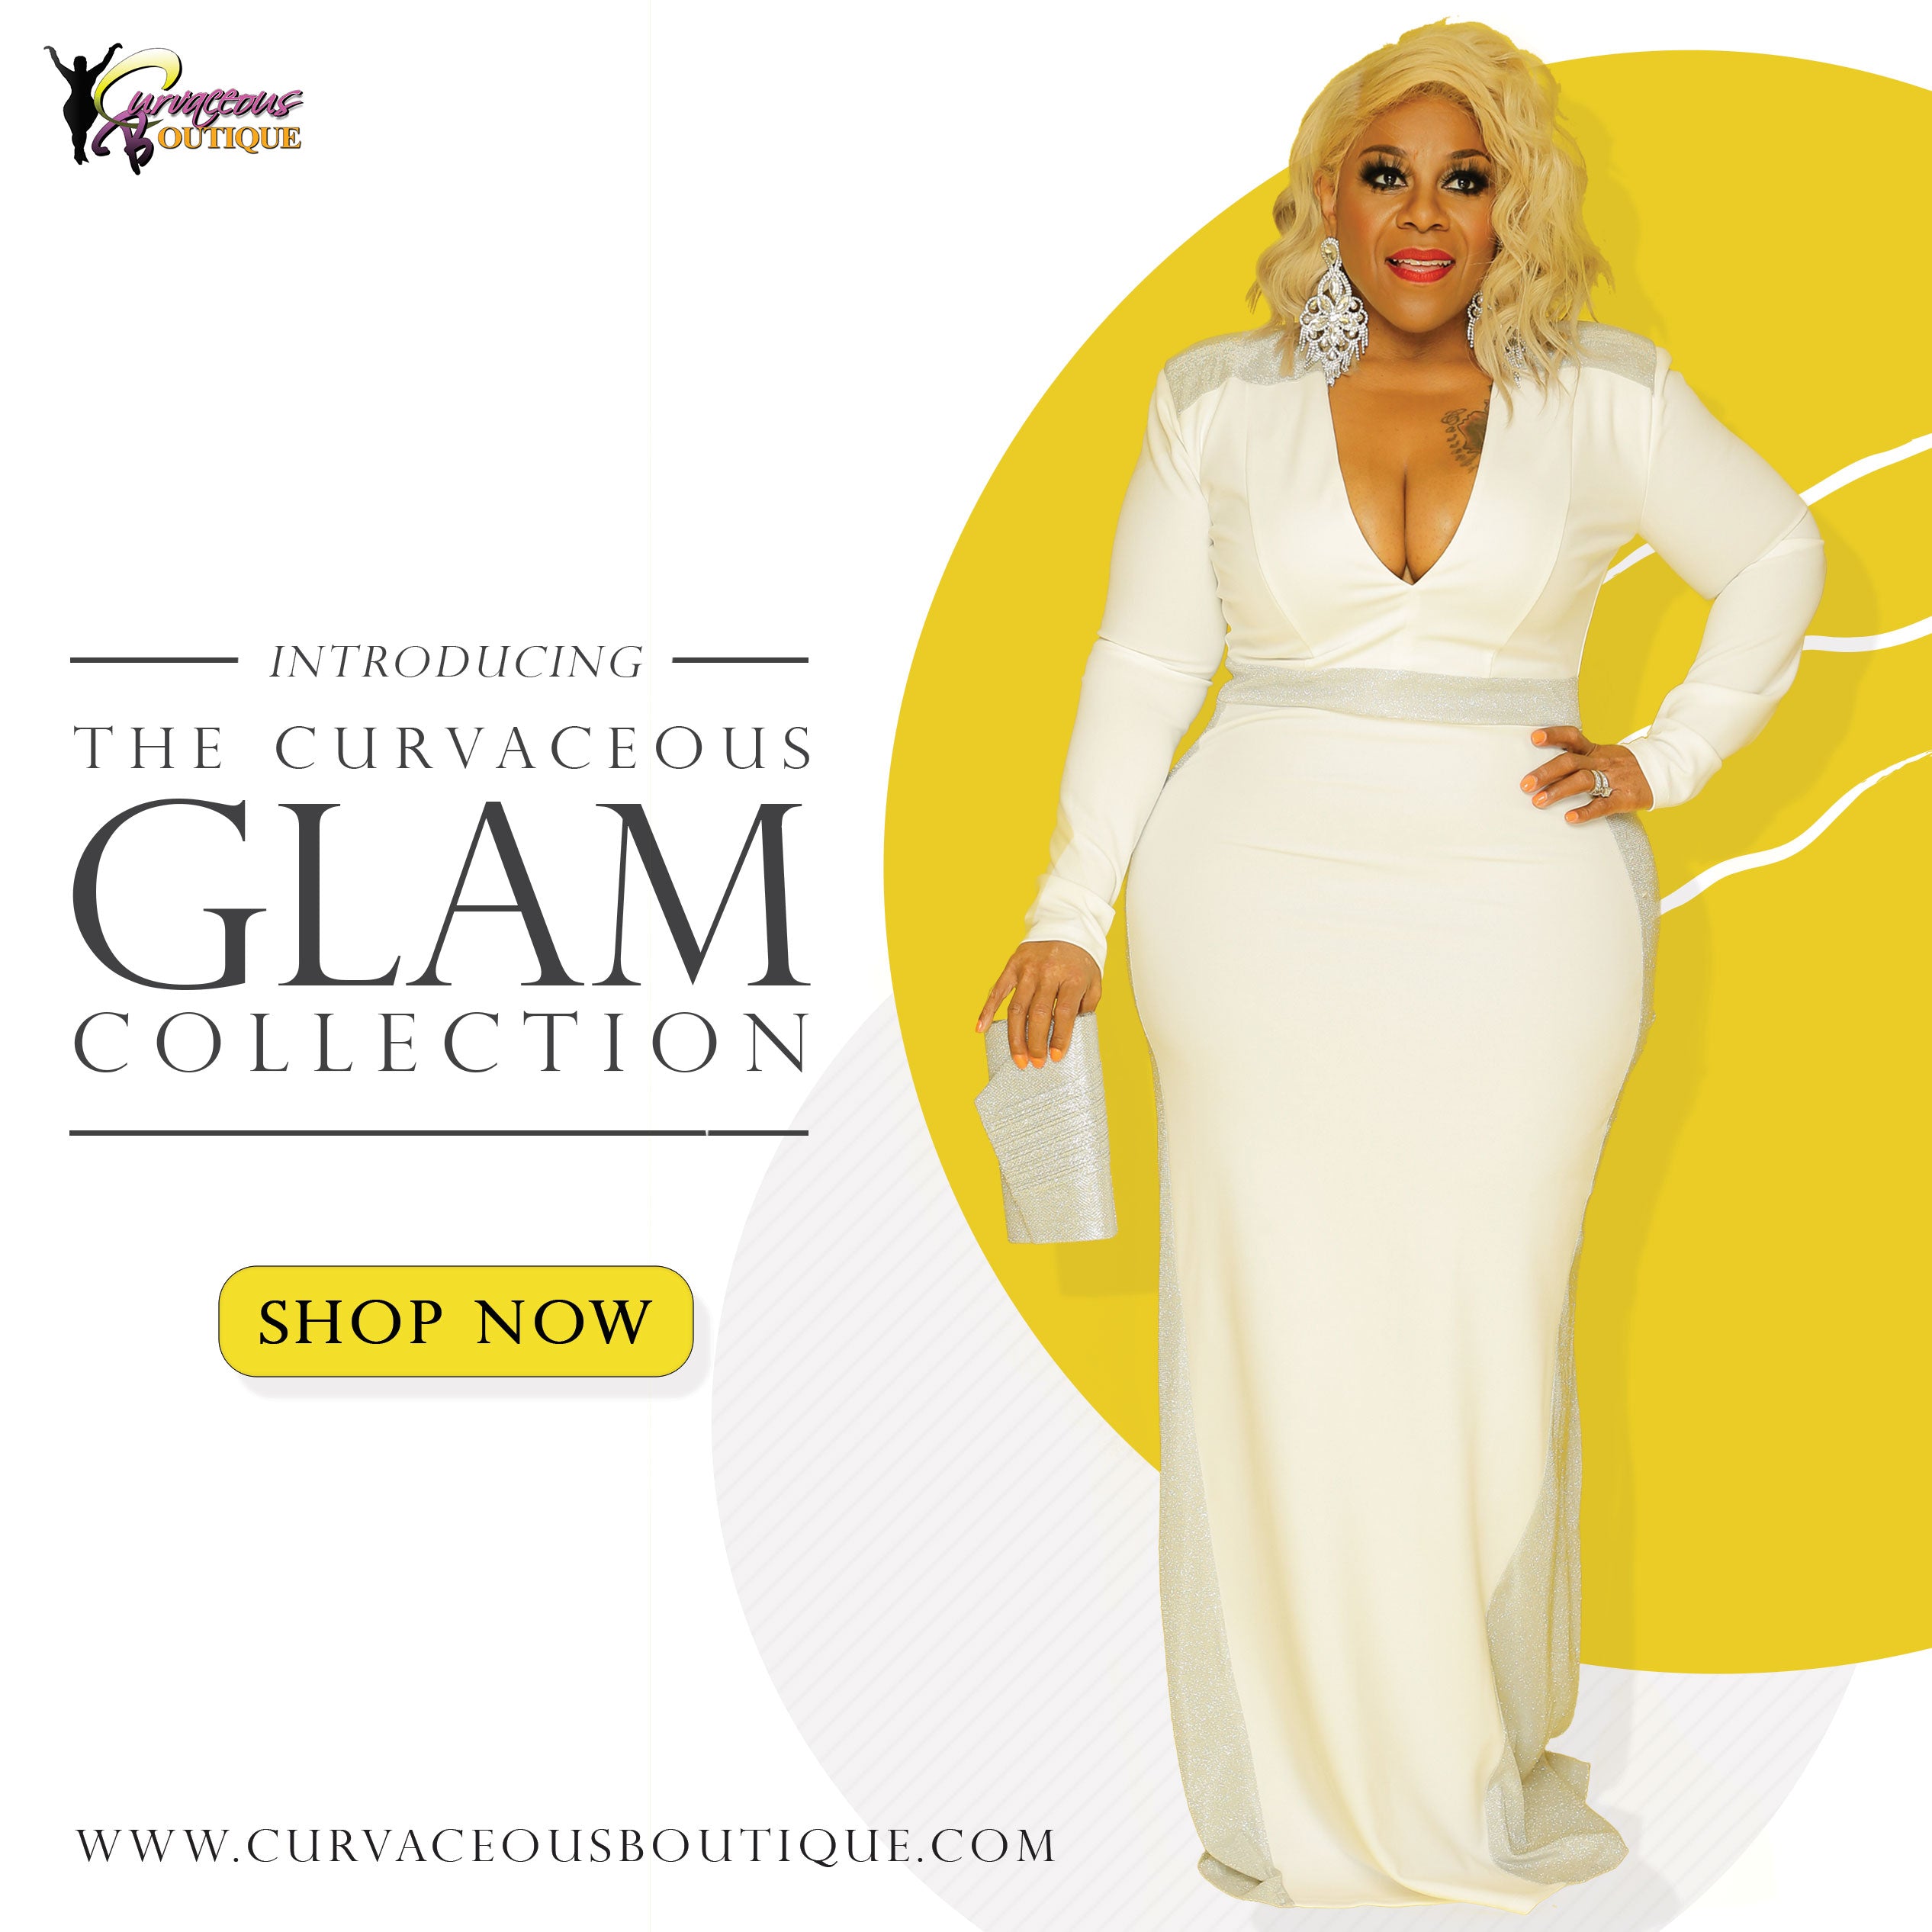 Curvaceous GLAM Collection